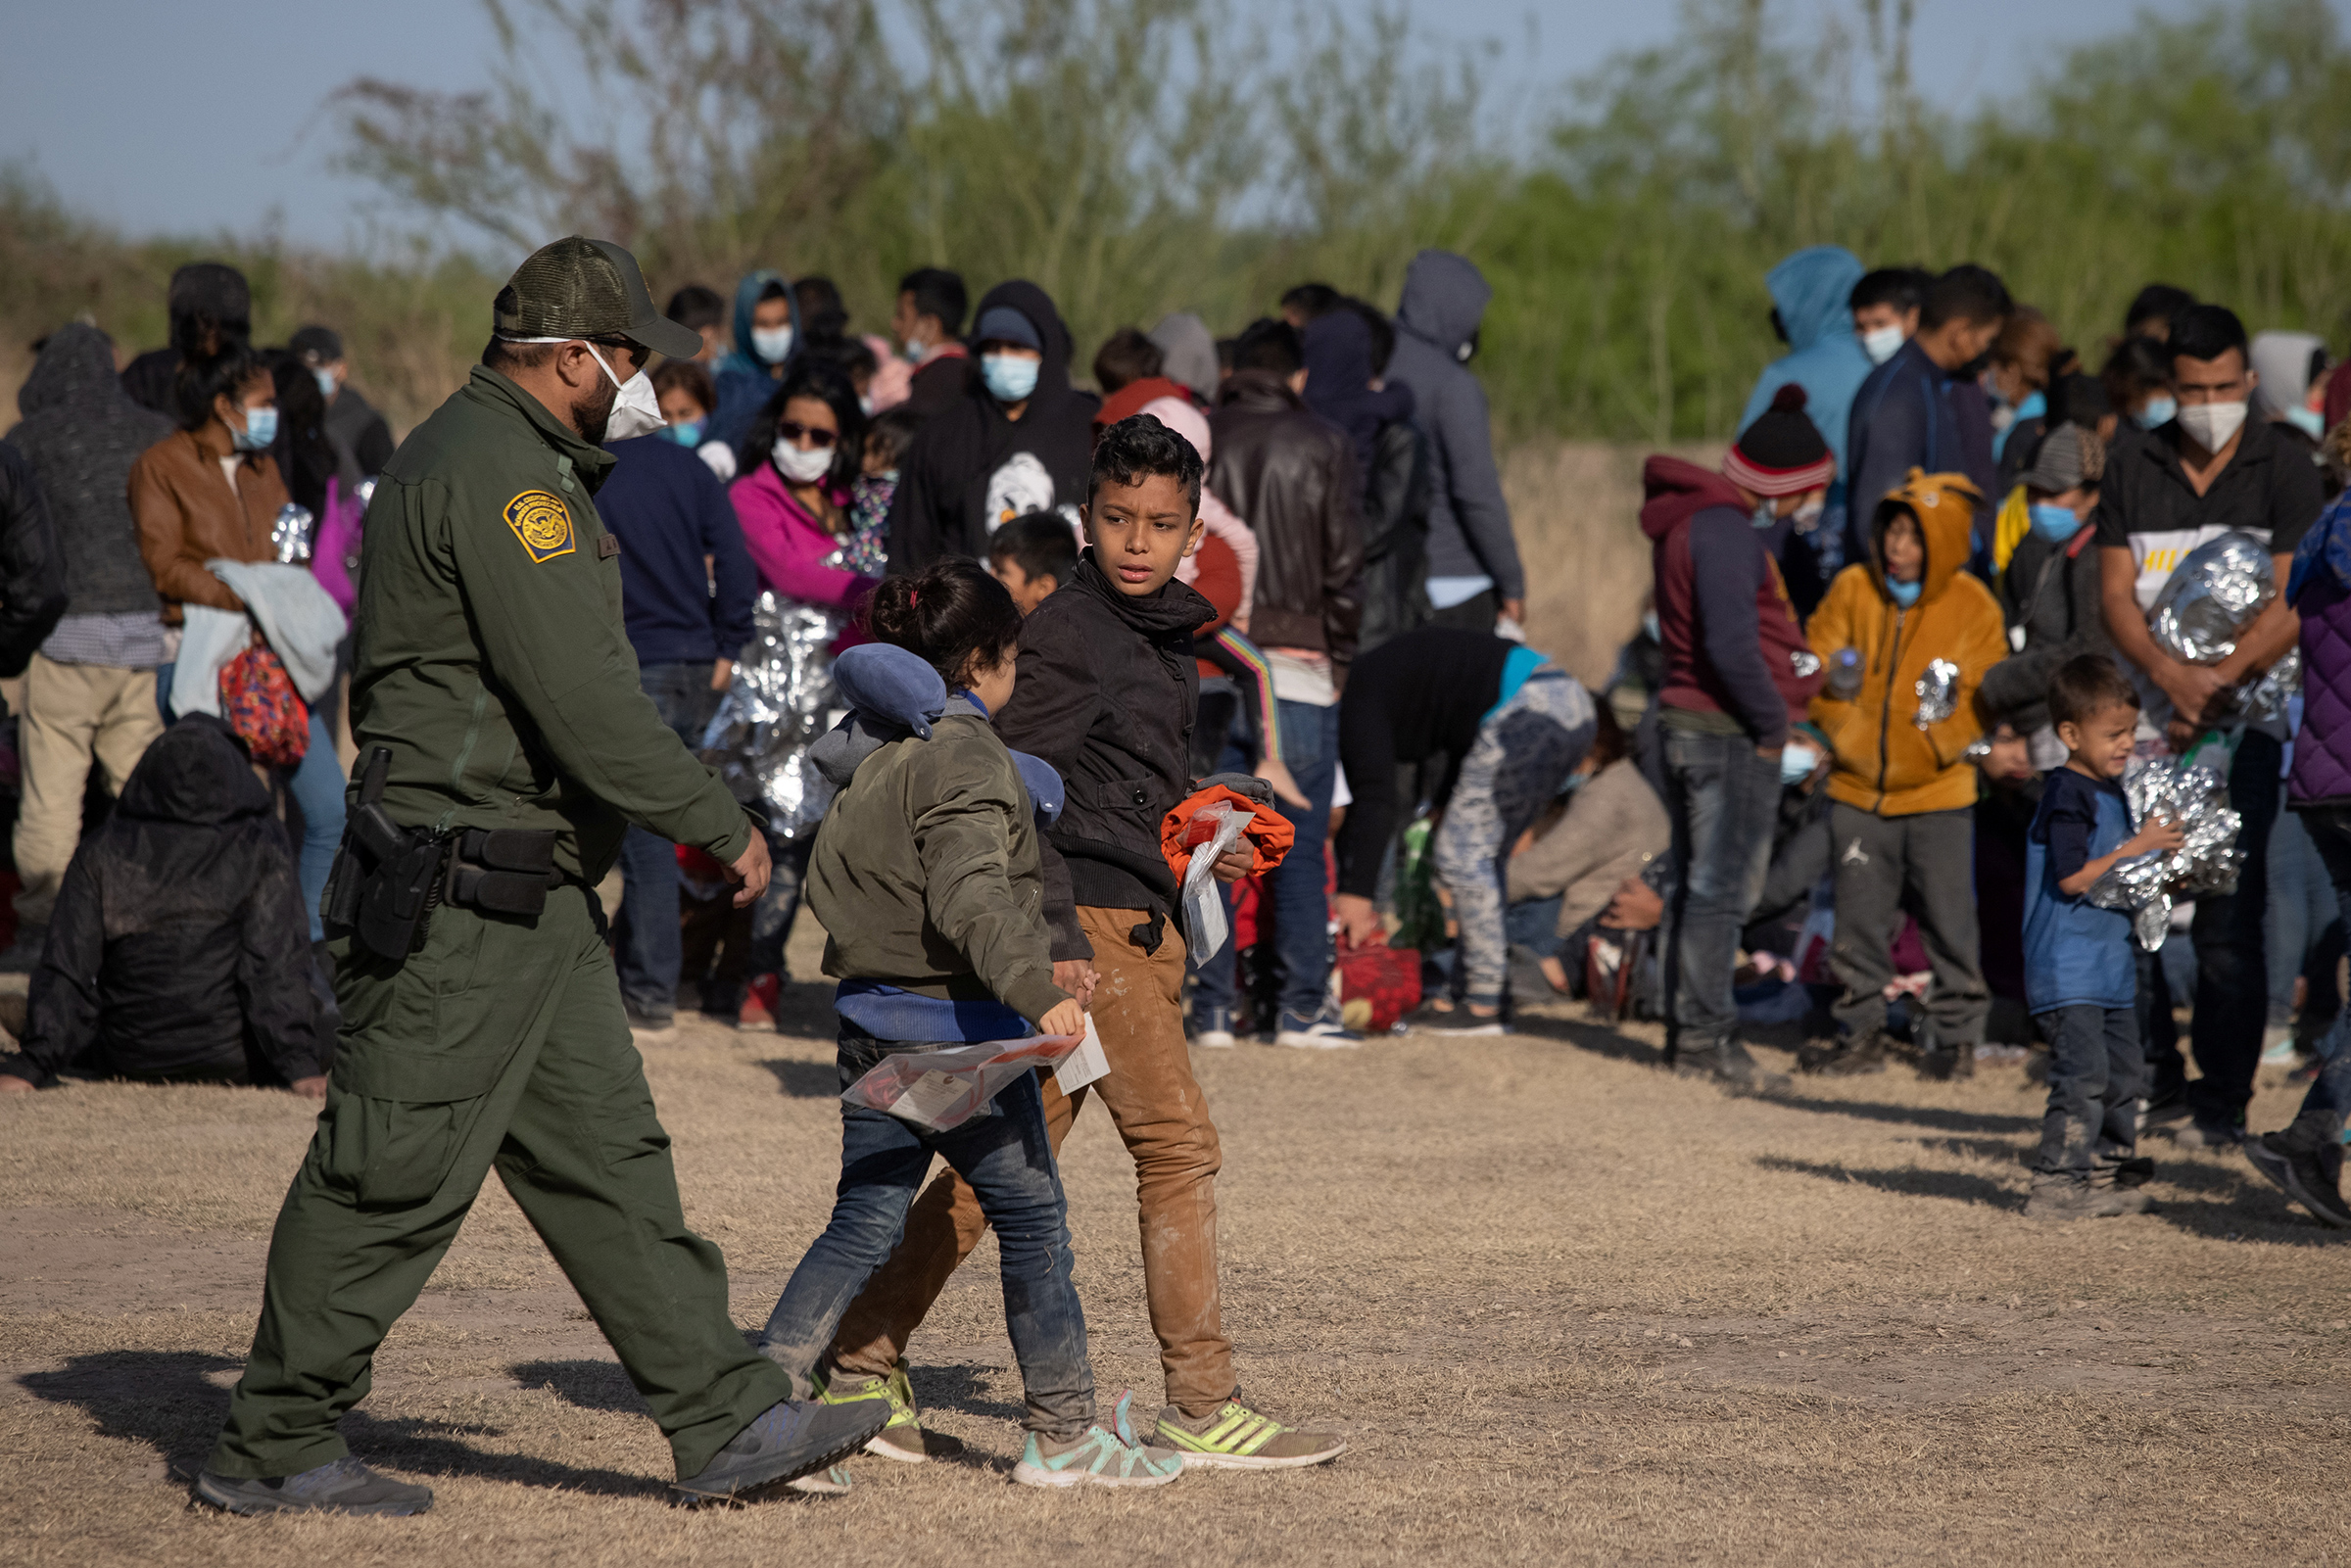 A U.S. Border Patrol Agent escorts two asylum-seeking unaccompanied minors from Central America as others take refuge near a baseball field after crossing the Rio Grande river into the United States from Mexico on rafts, in La Joya, Texas, on March 19